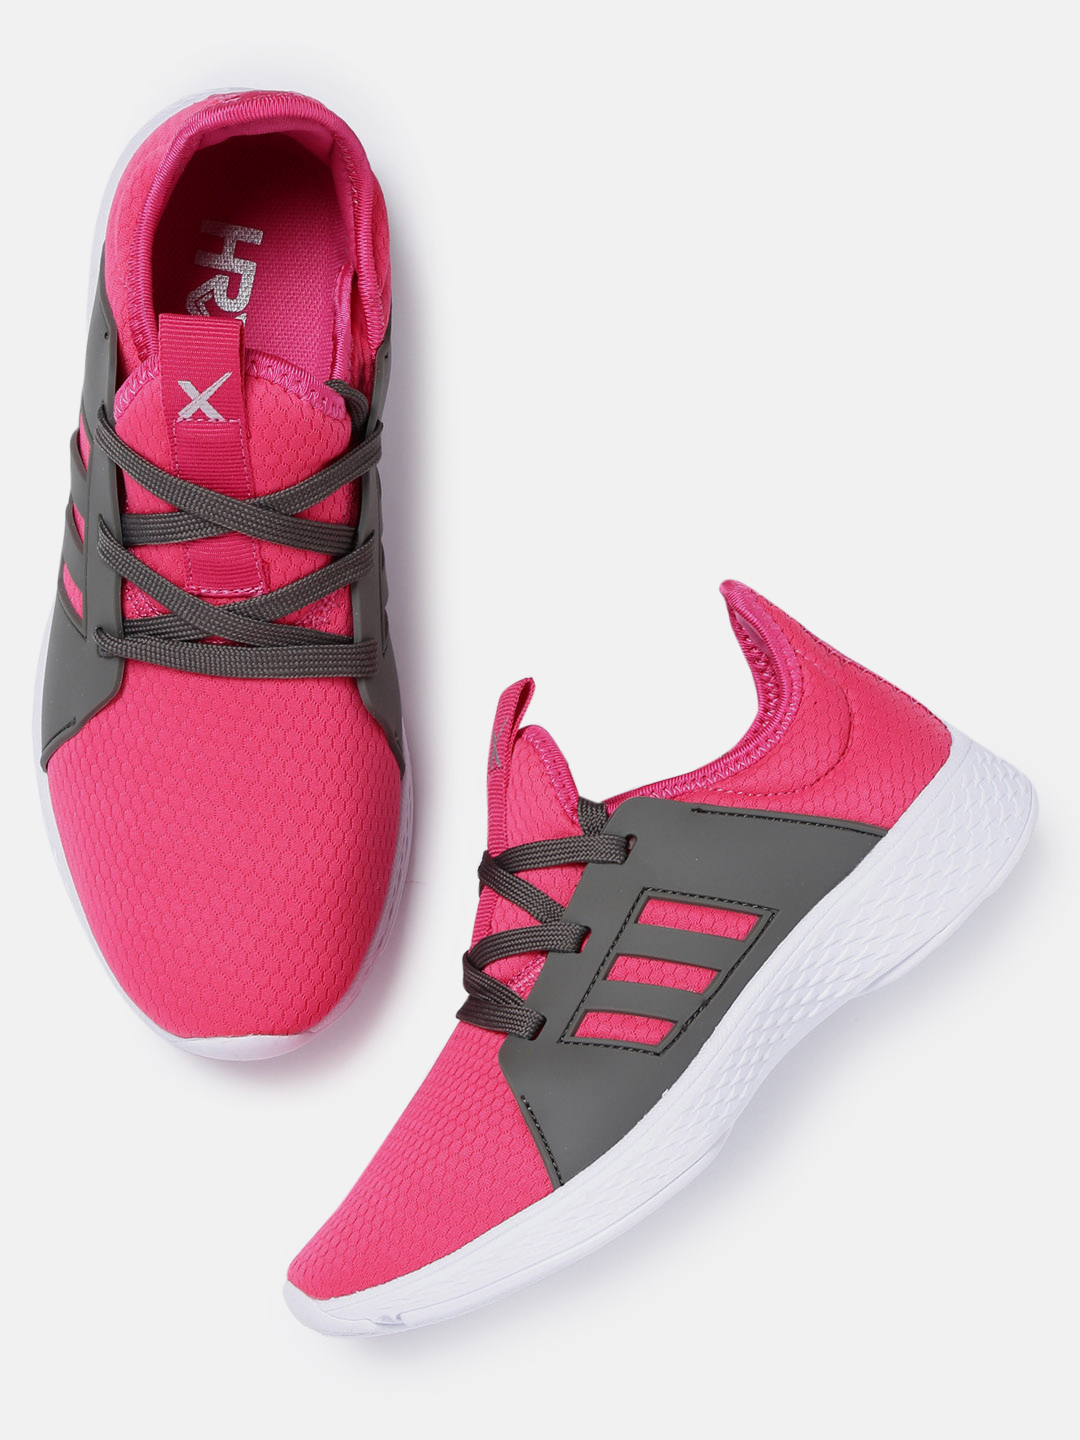 hrx sports shoes for womens